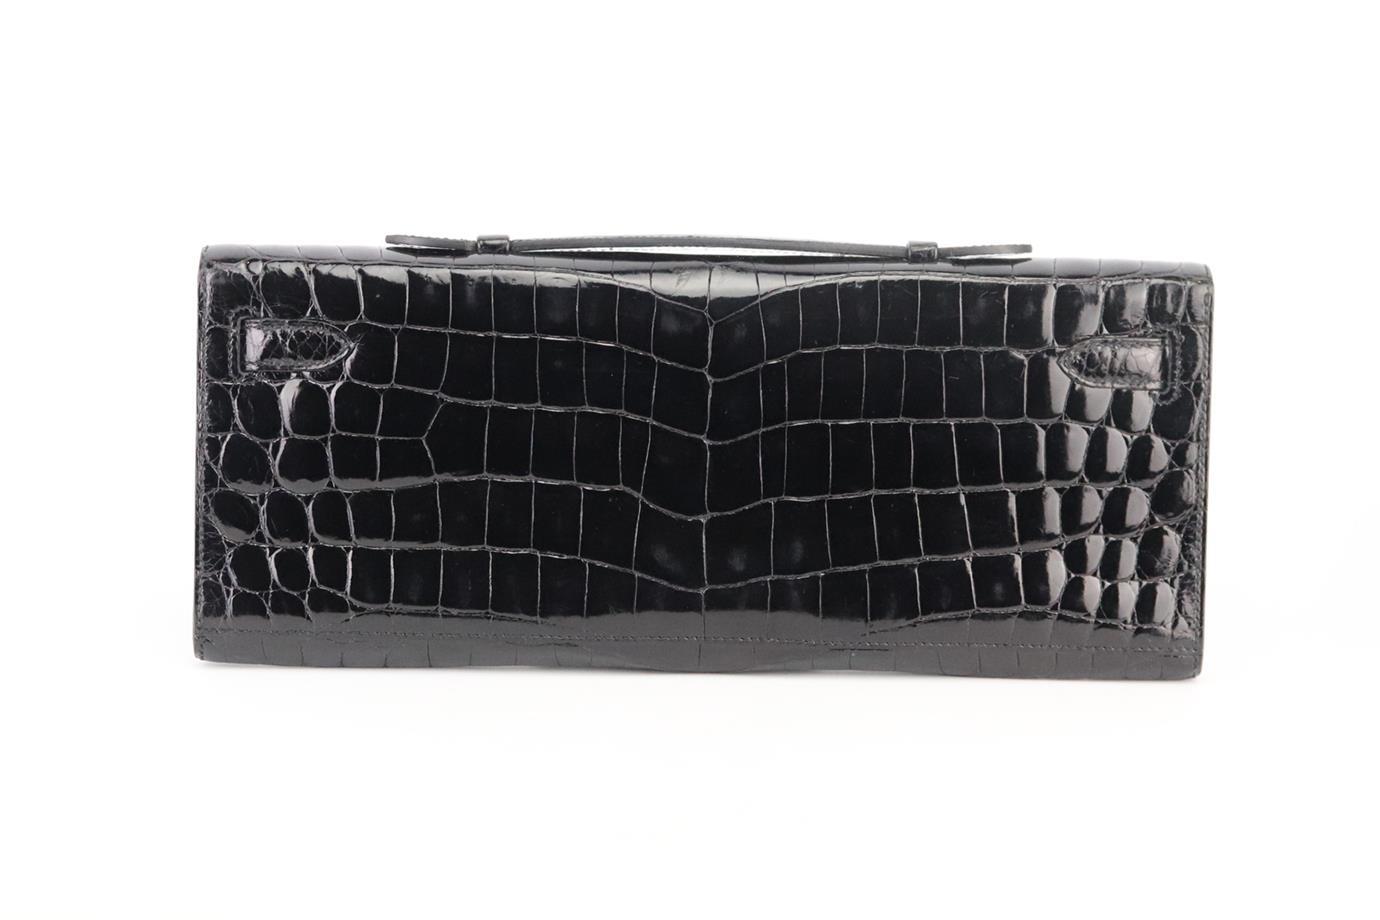 Hermès 2011 Kelly Cut Niloticus Crocodile Clutch. Made in France, this beautiful 2011 Hermès ‘Kelly Cut’ clutch bag has been made from black ‘Niloticus’ crocodile exterior in ‘Noir’ with matching leather interior, this piece is decorated with